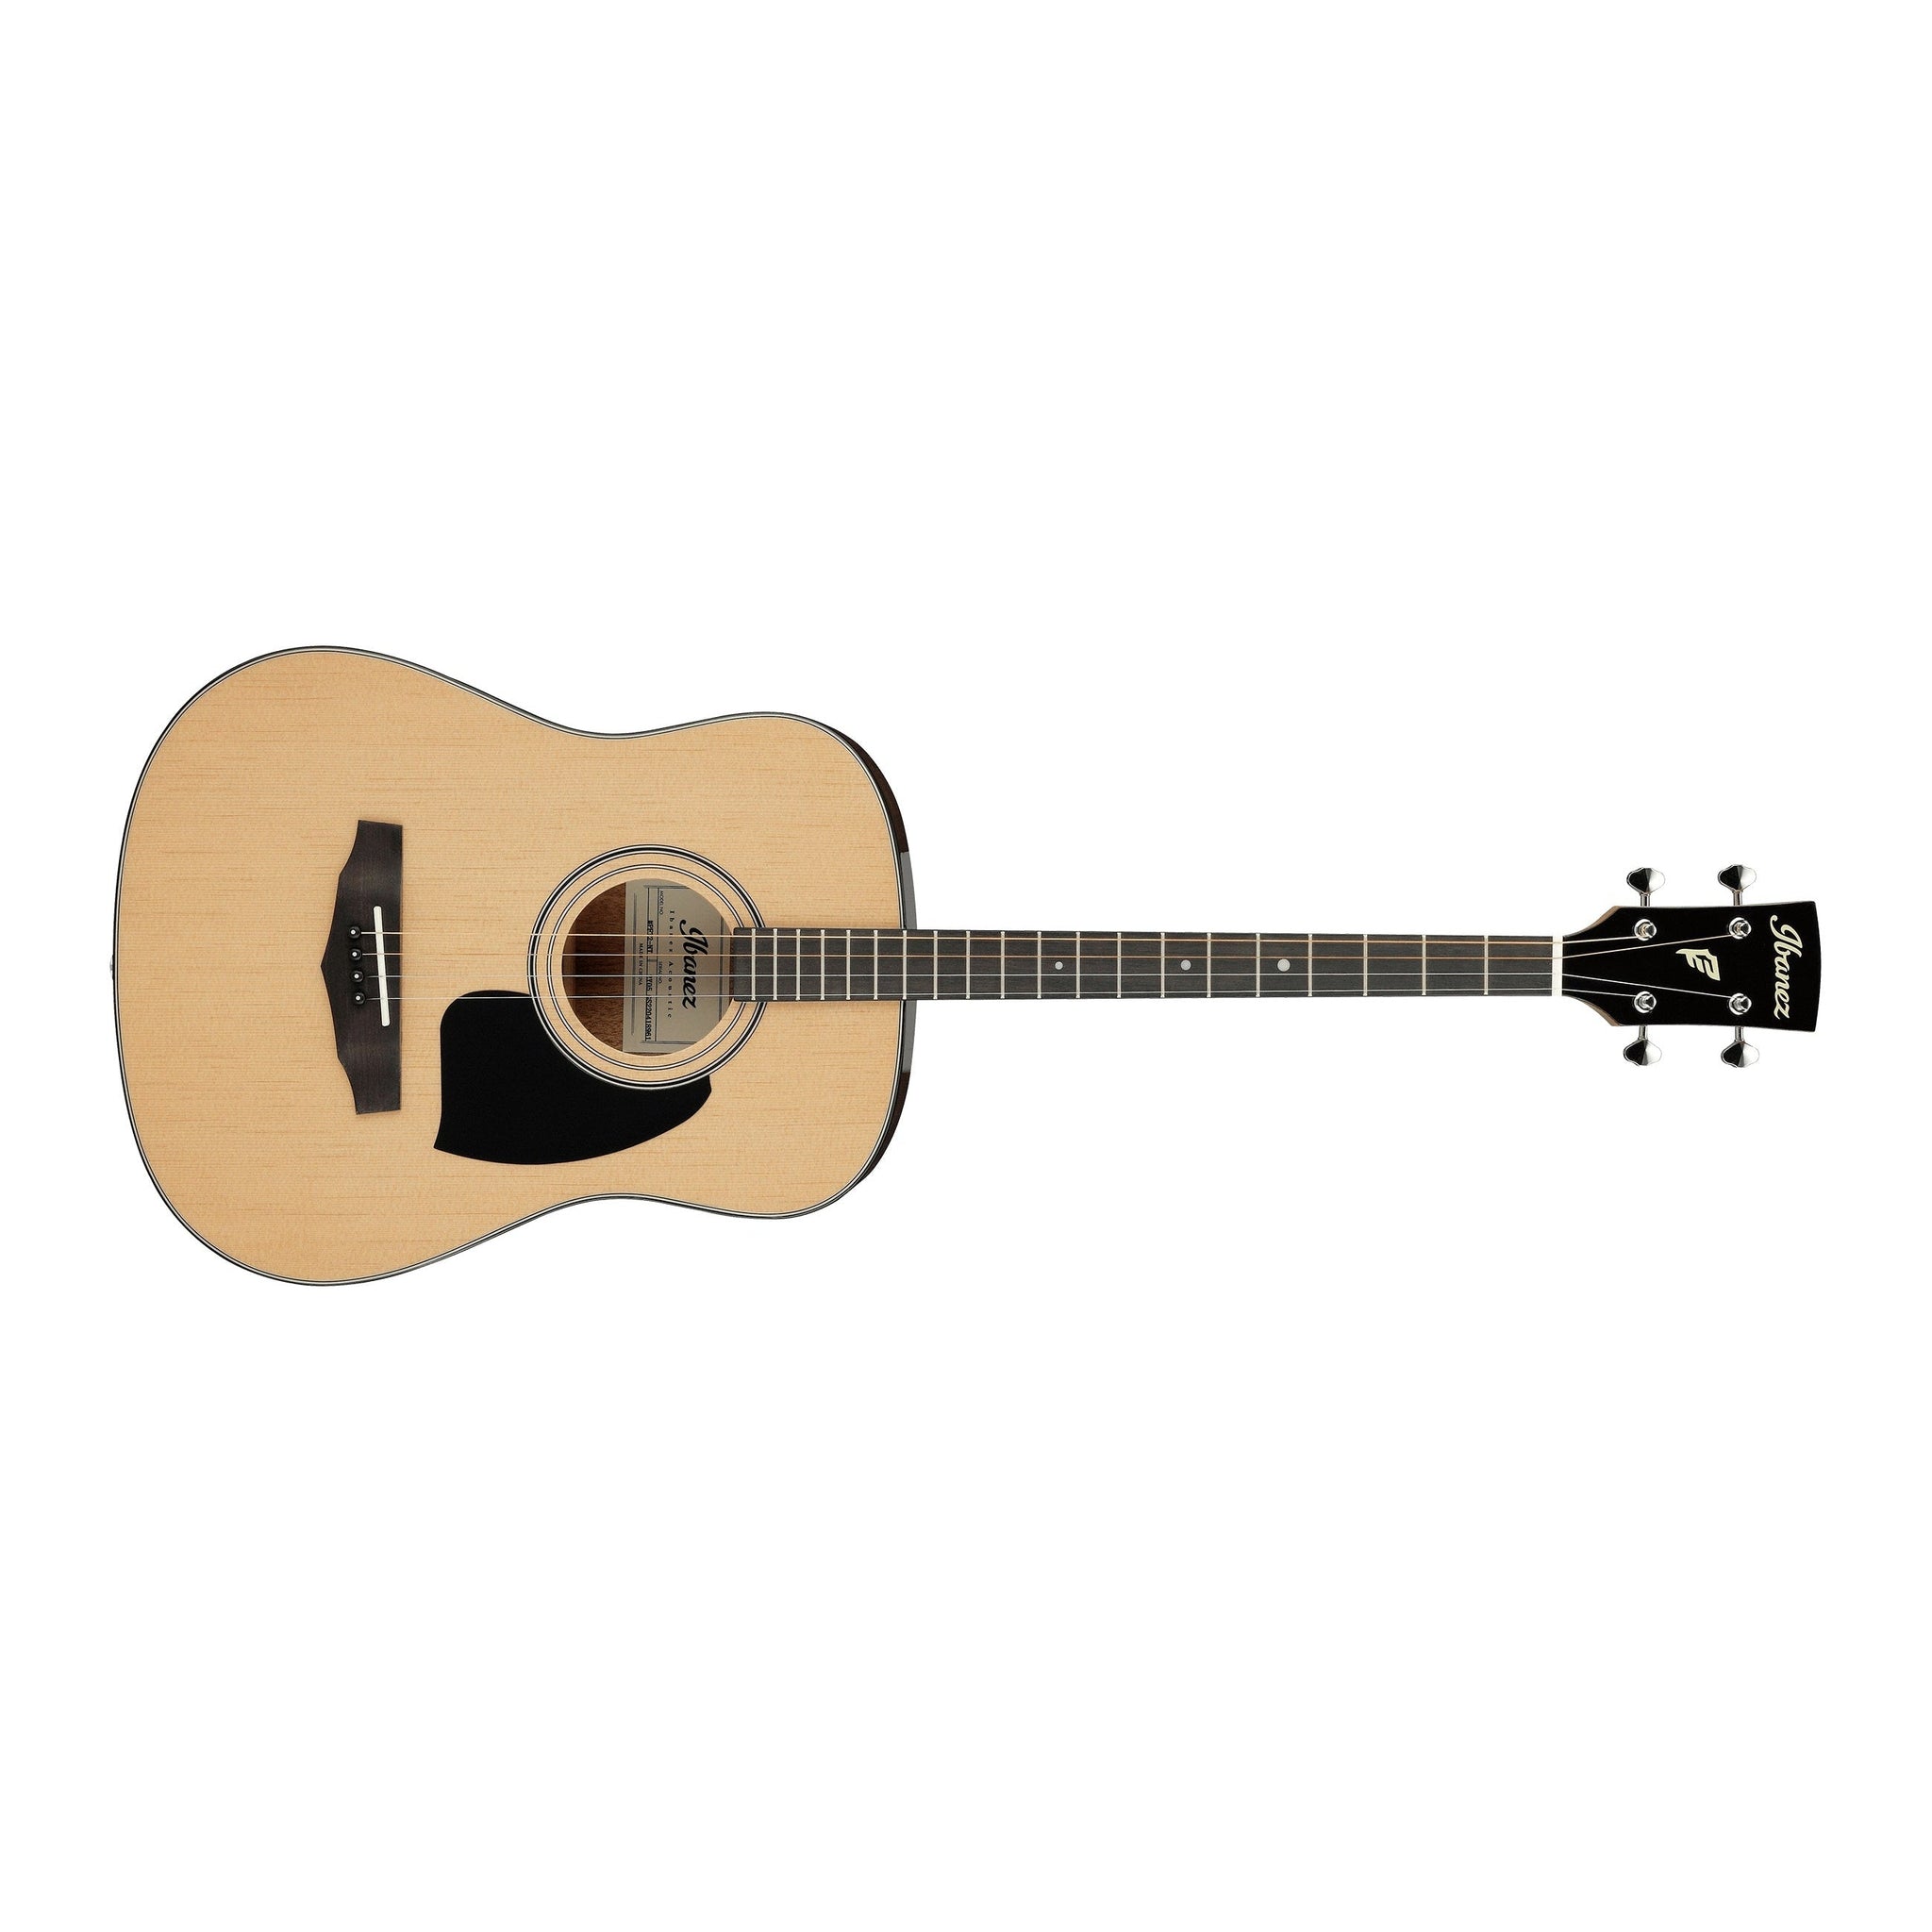 Ibanez PFT2-NT Mini Dreadnought Acoustic Tenor Guitar-Natural-Music World Academy